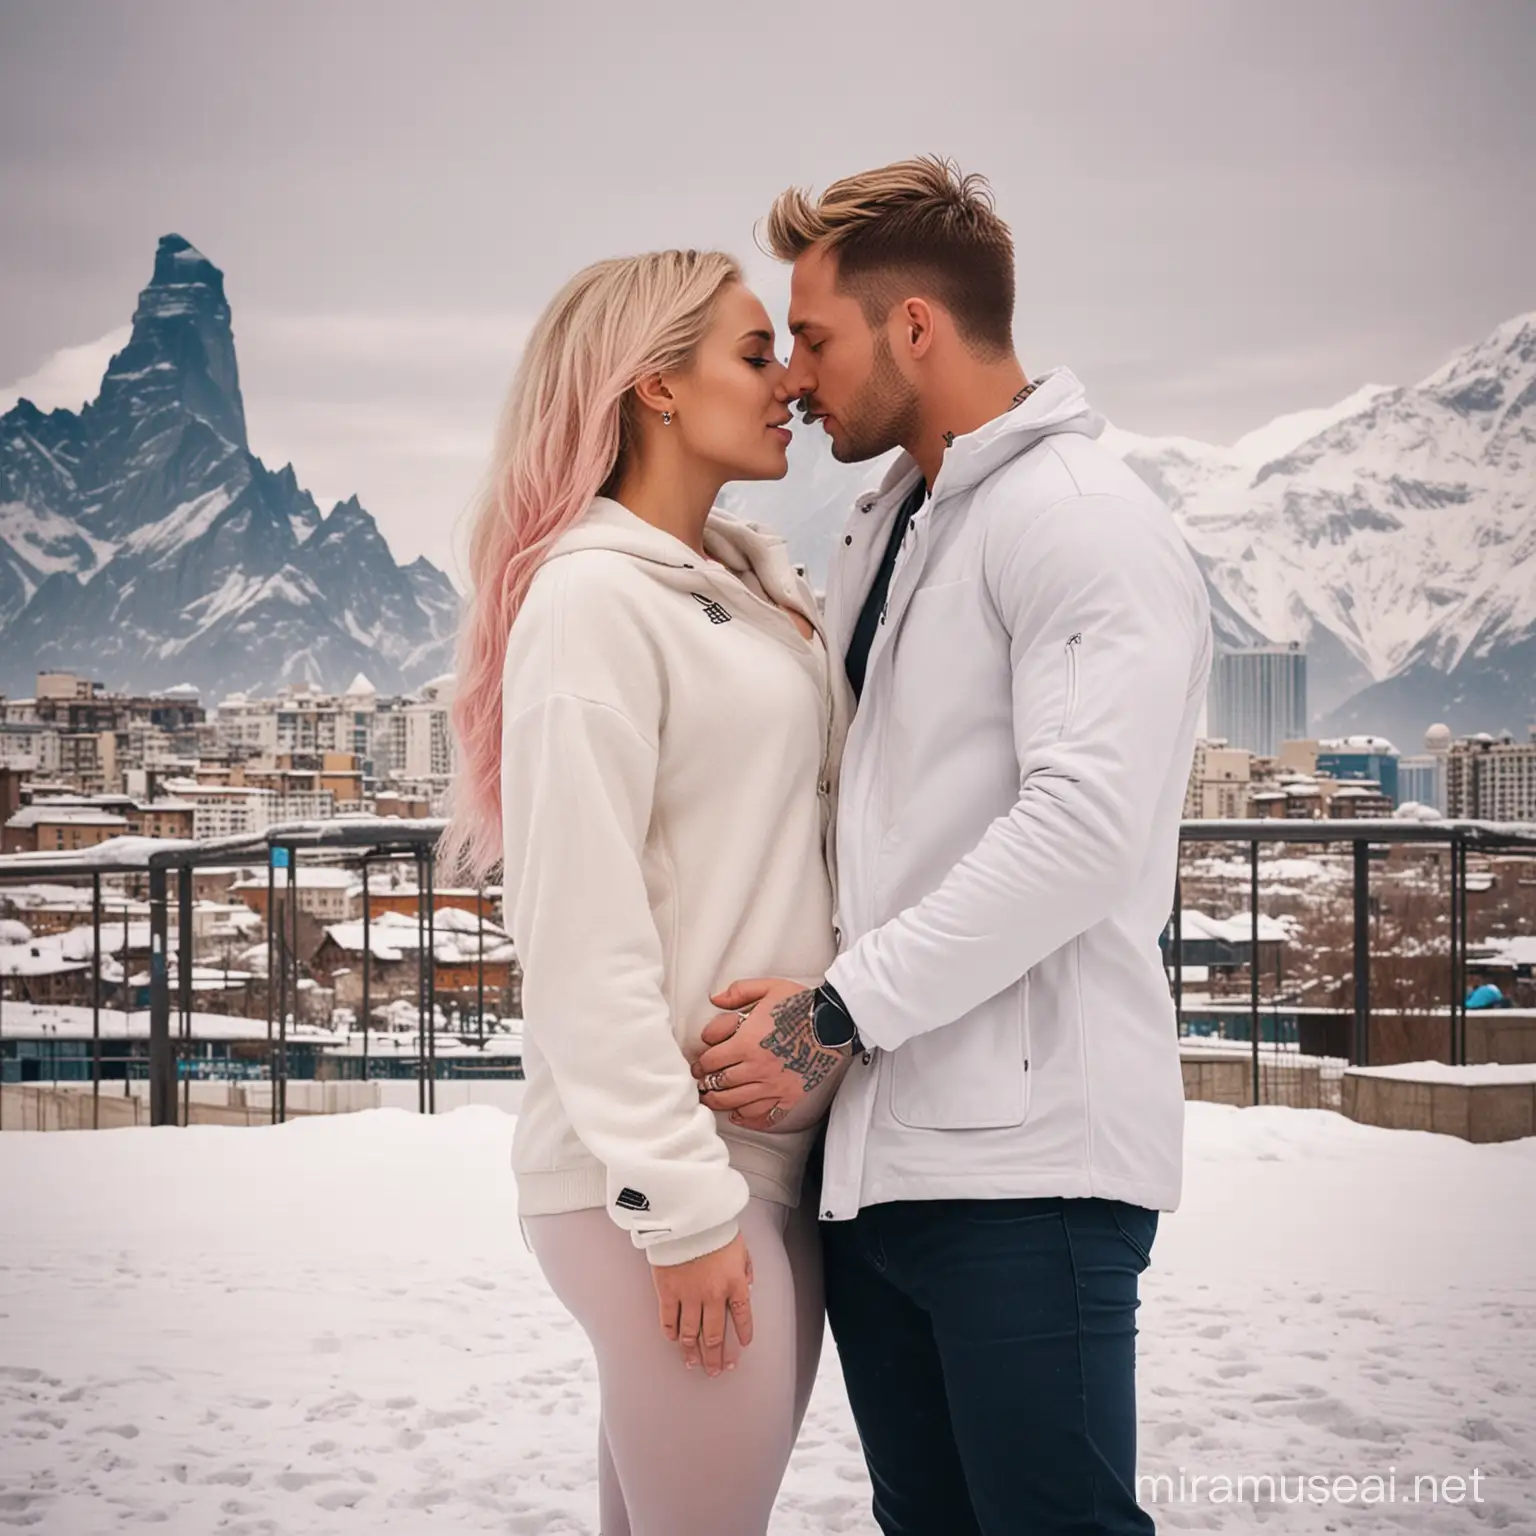 Romantic Winter Skiing Muscular Soccer Player Kissing Blonde Pregnant Wife with Snowy Mountain Backdrop